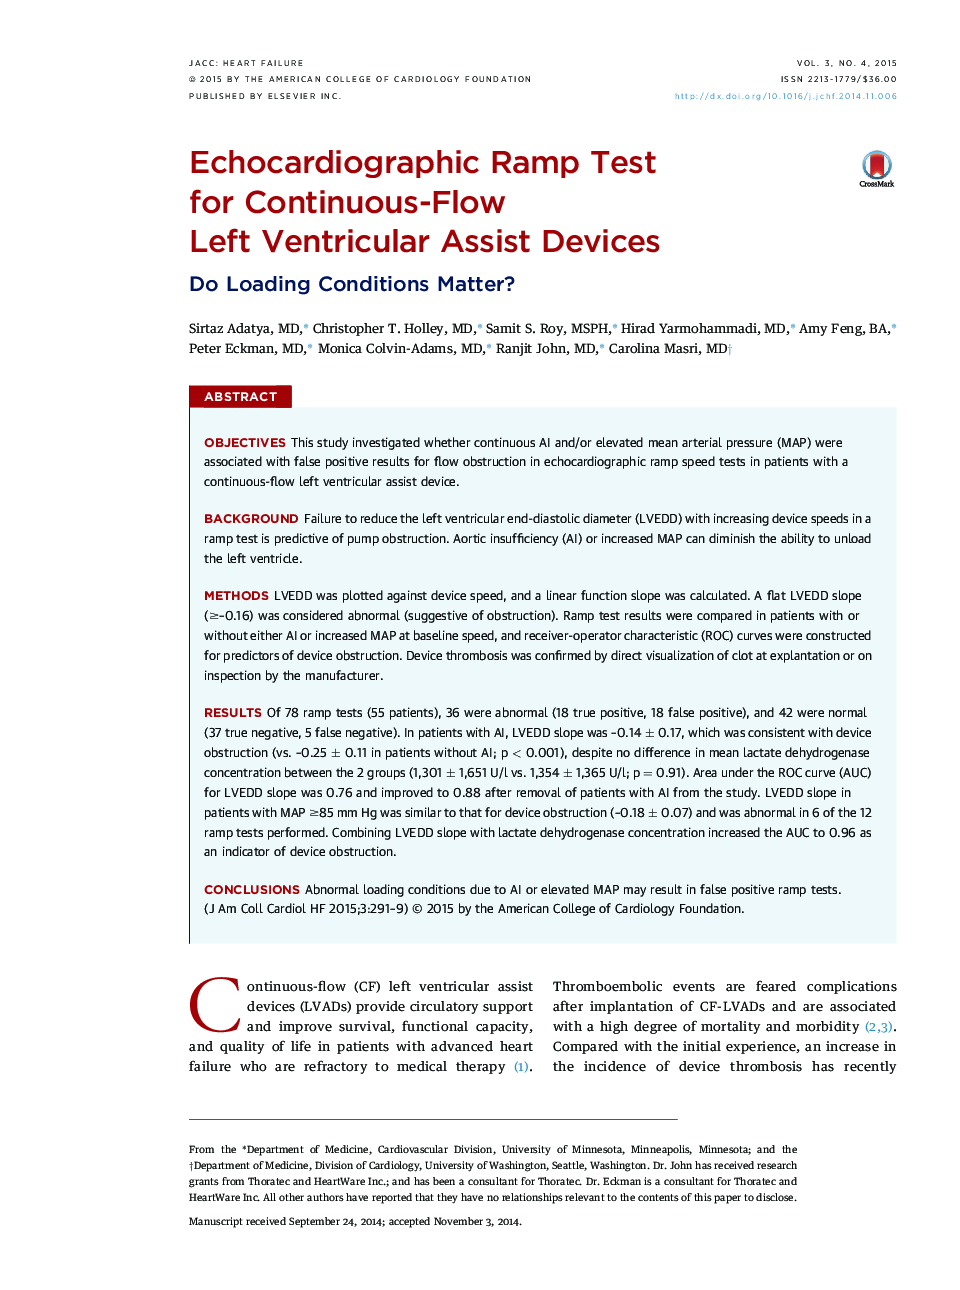 Echocardiographic Ramp Test for Continuous-Flow Left Ventricular Assist Devices : Do Loading Conditions Matter?